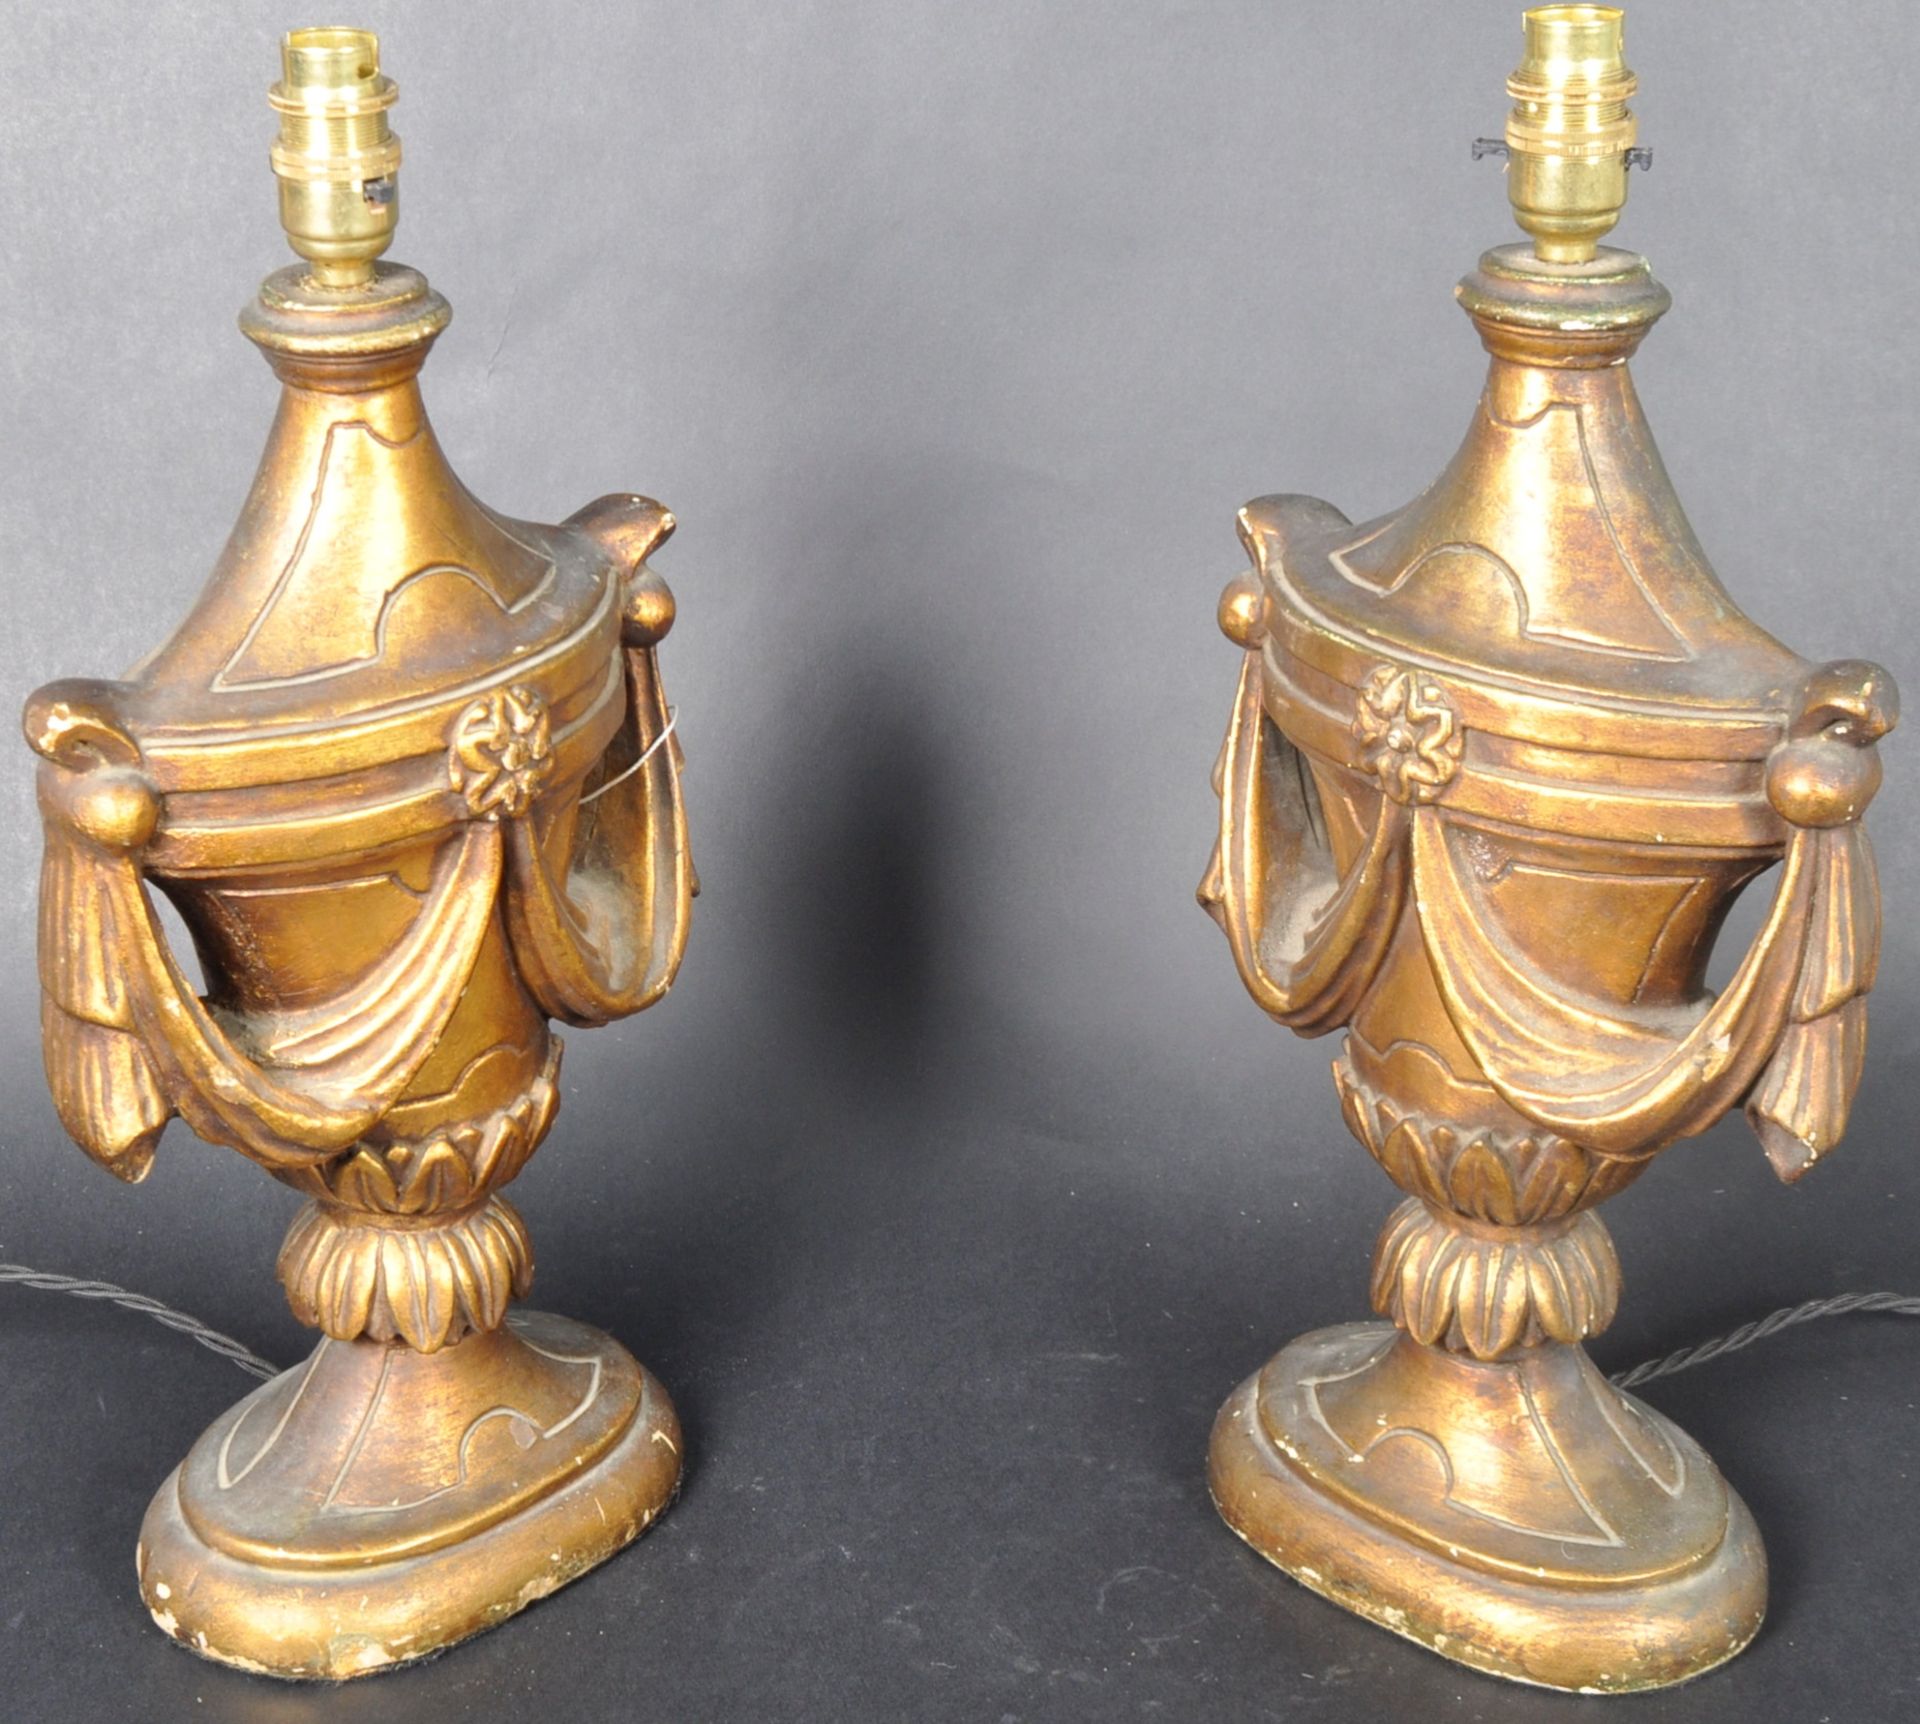 PAIR OF ART DECO GILT RESIN TABLE LAMP LIGHTS OF URN FORM - Image 4 of 9